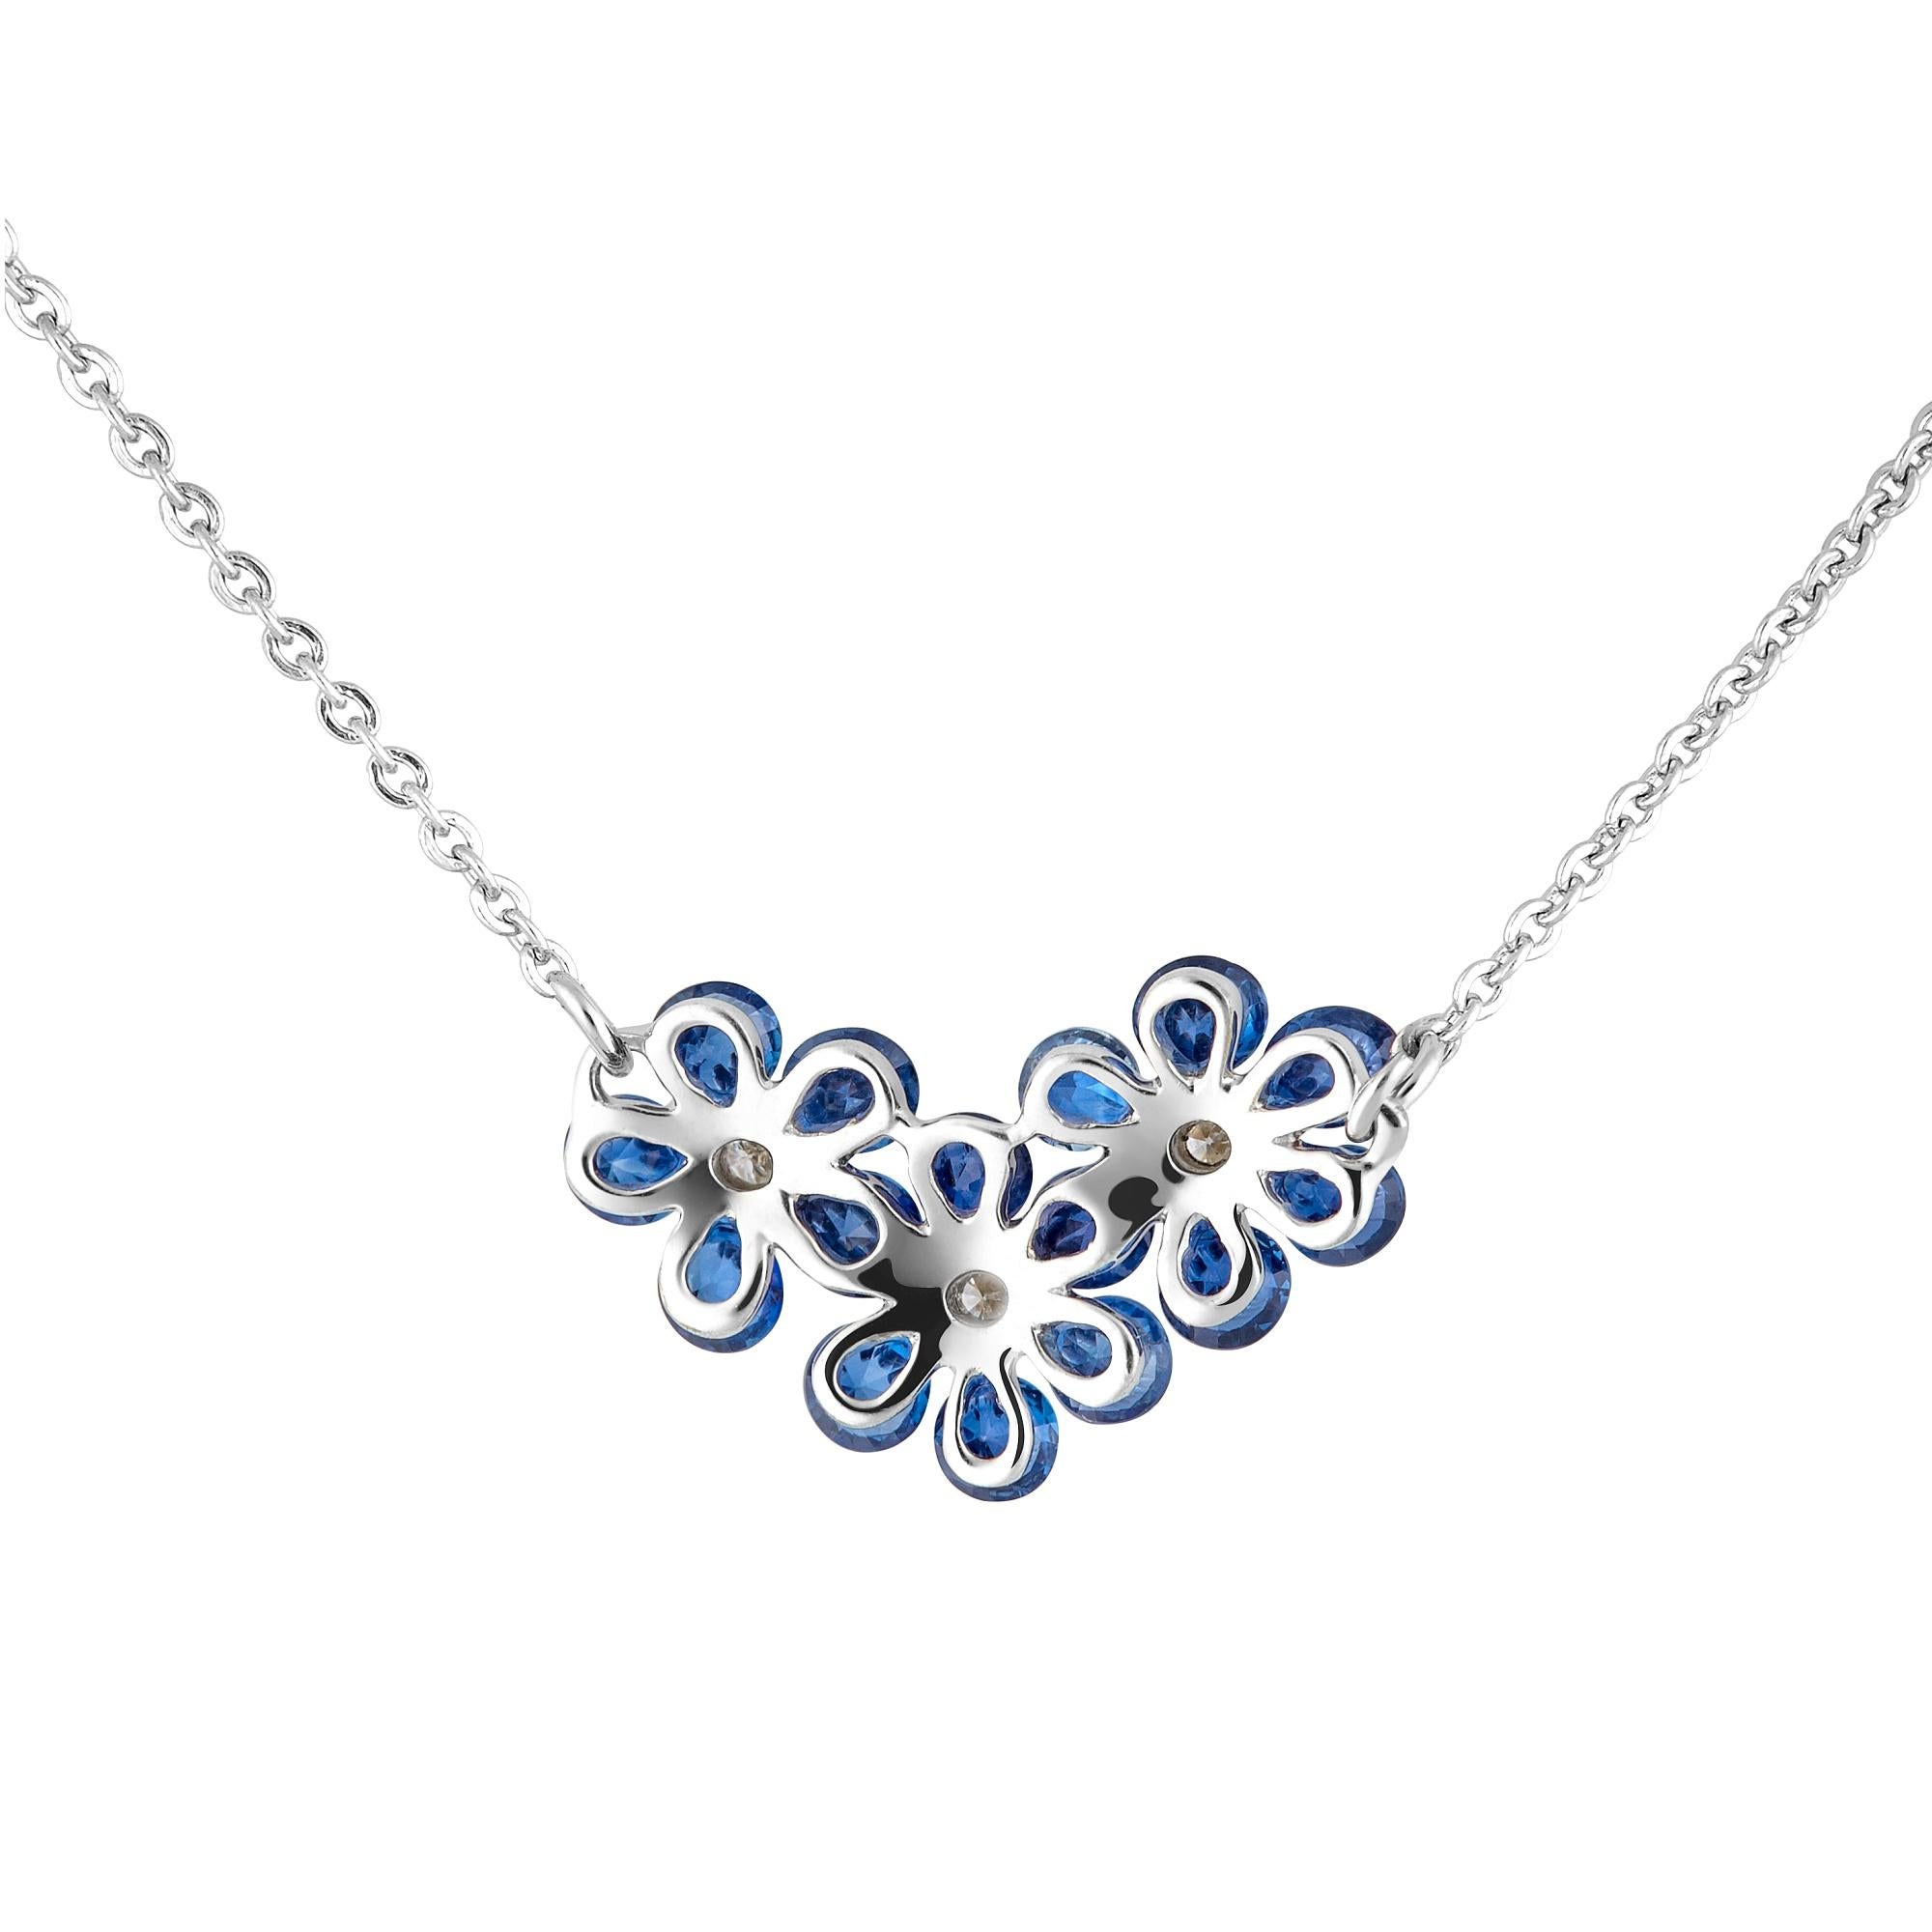 Diamond-cut blue sapphires are mounted carefully in delicate flower design, employing innovative technology.  

Internationally patented, Waltzing Brilliance technology is an innovative jewellery invention patented by a leading International